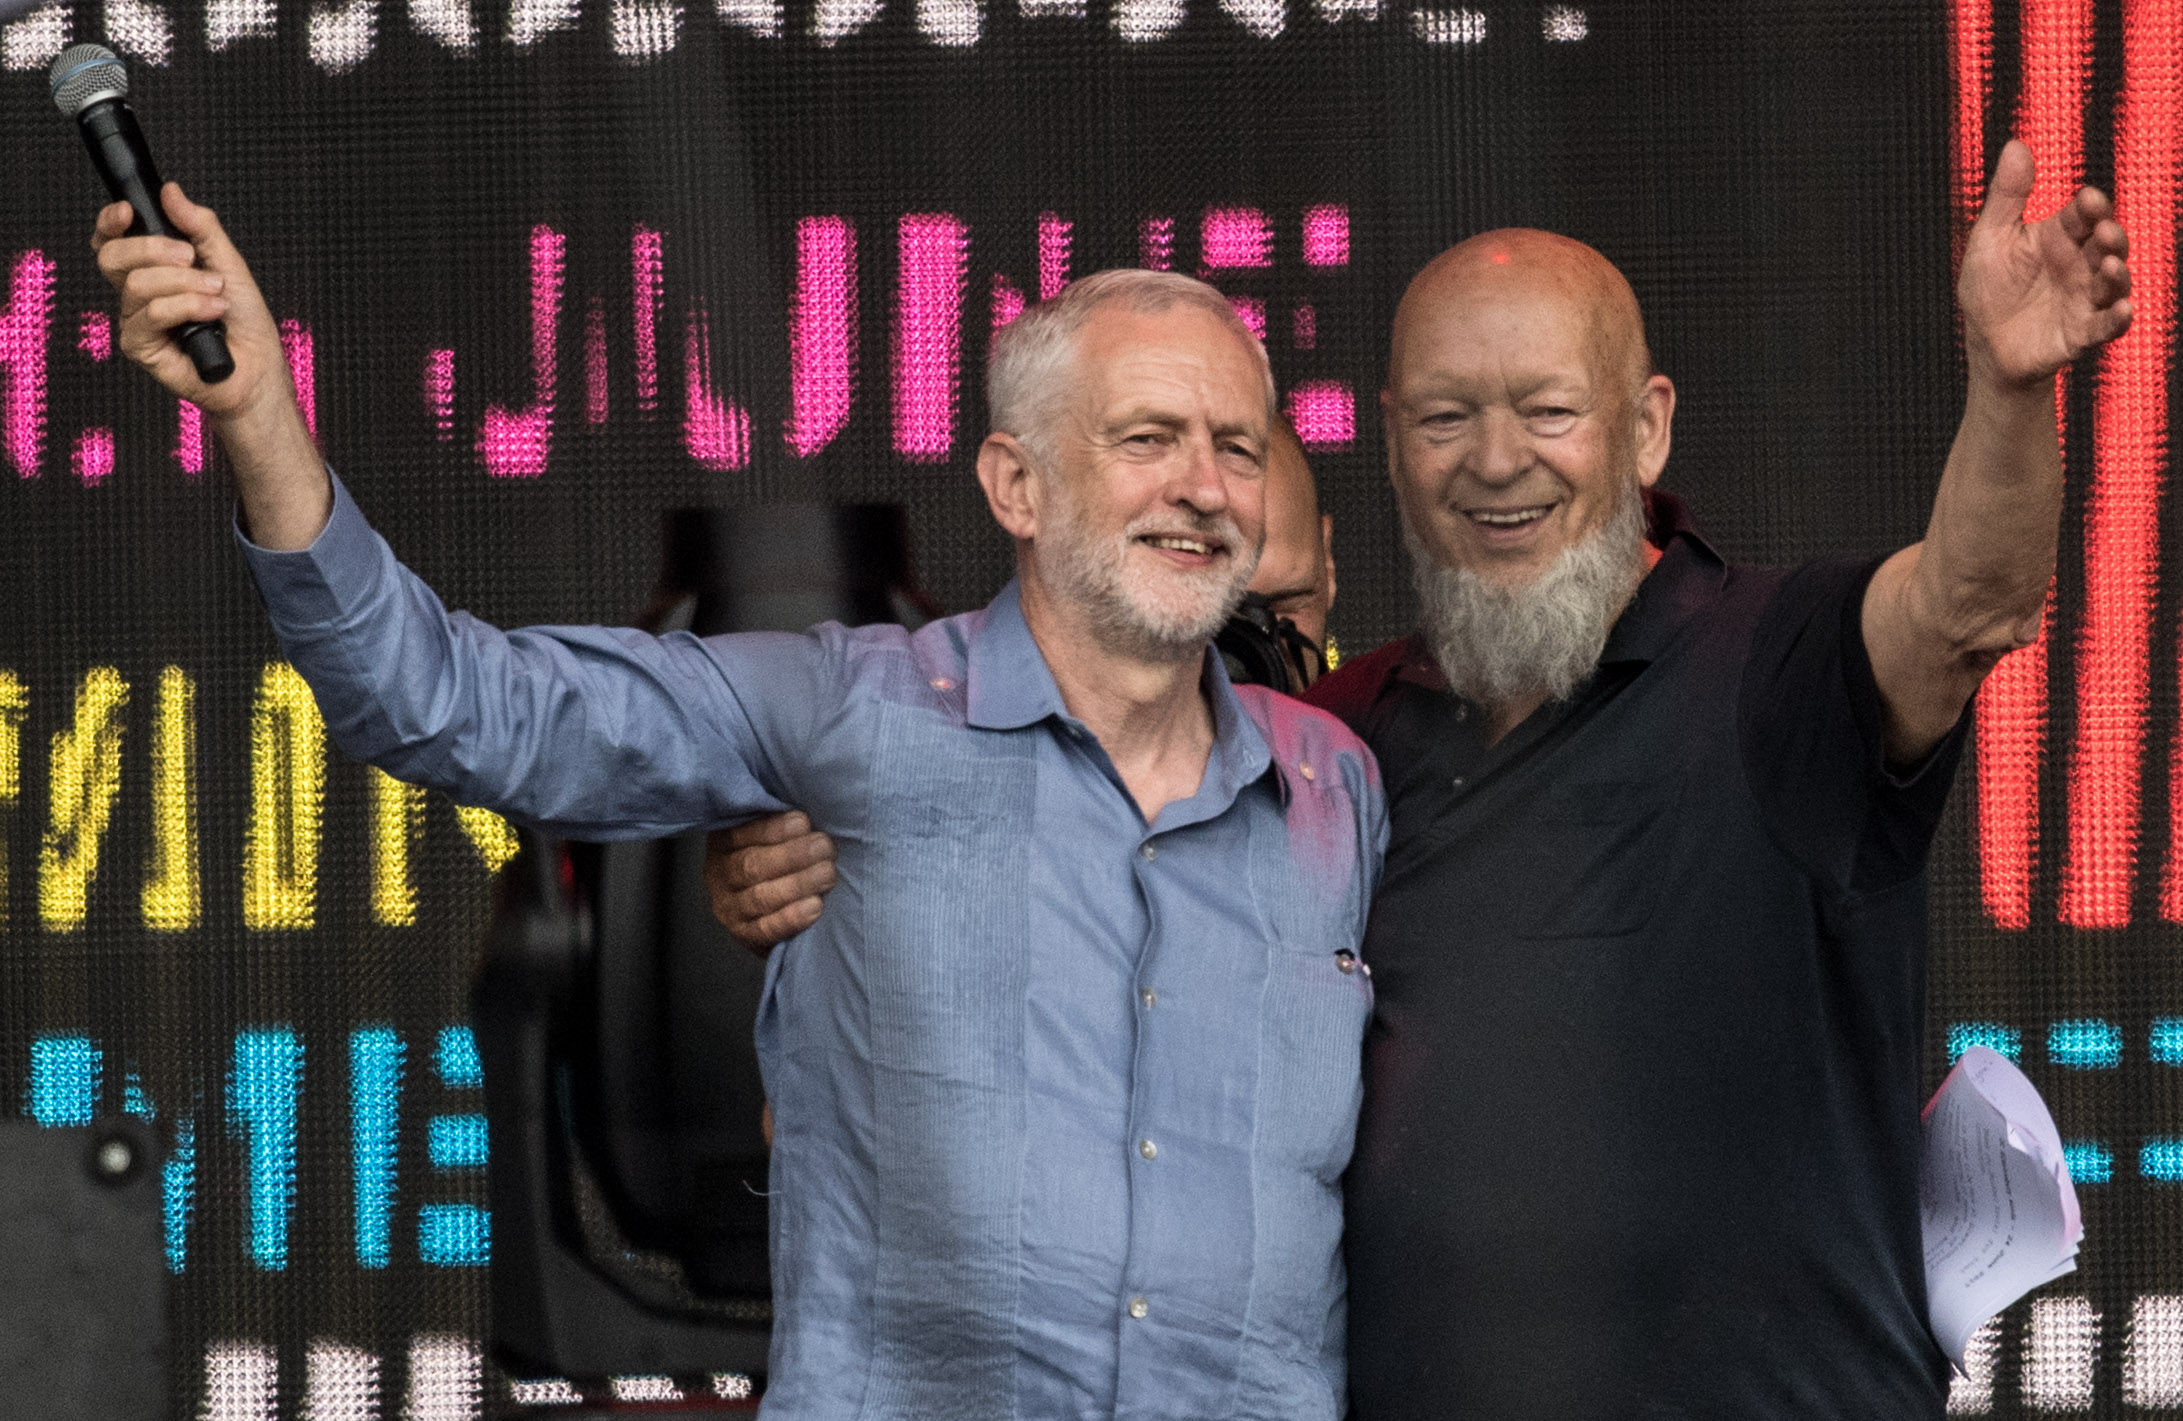  Jeremy Corbyn and Michael Eavis on the Pyramid Stage 